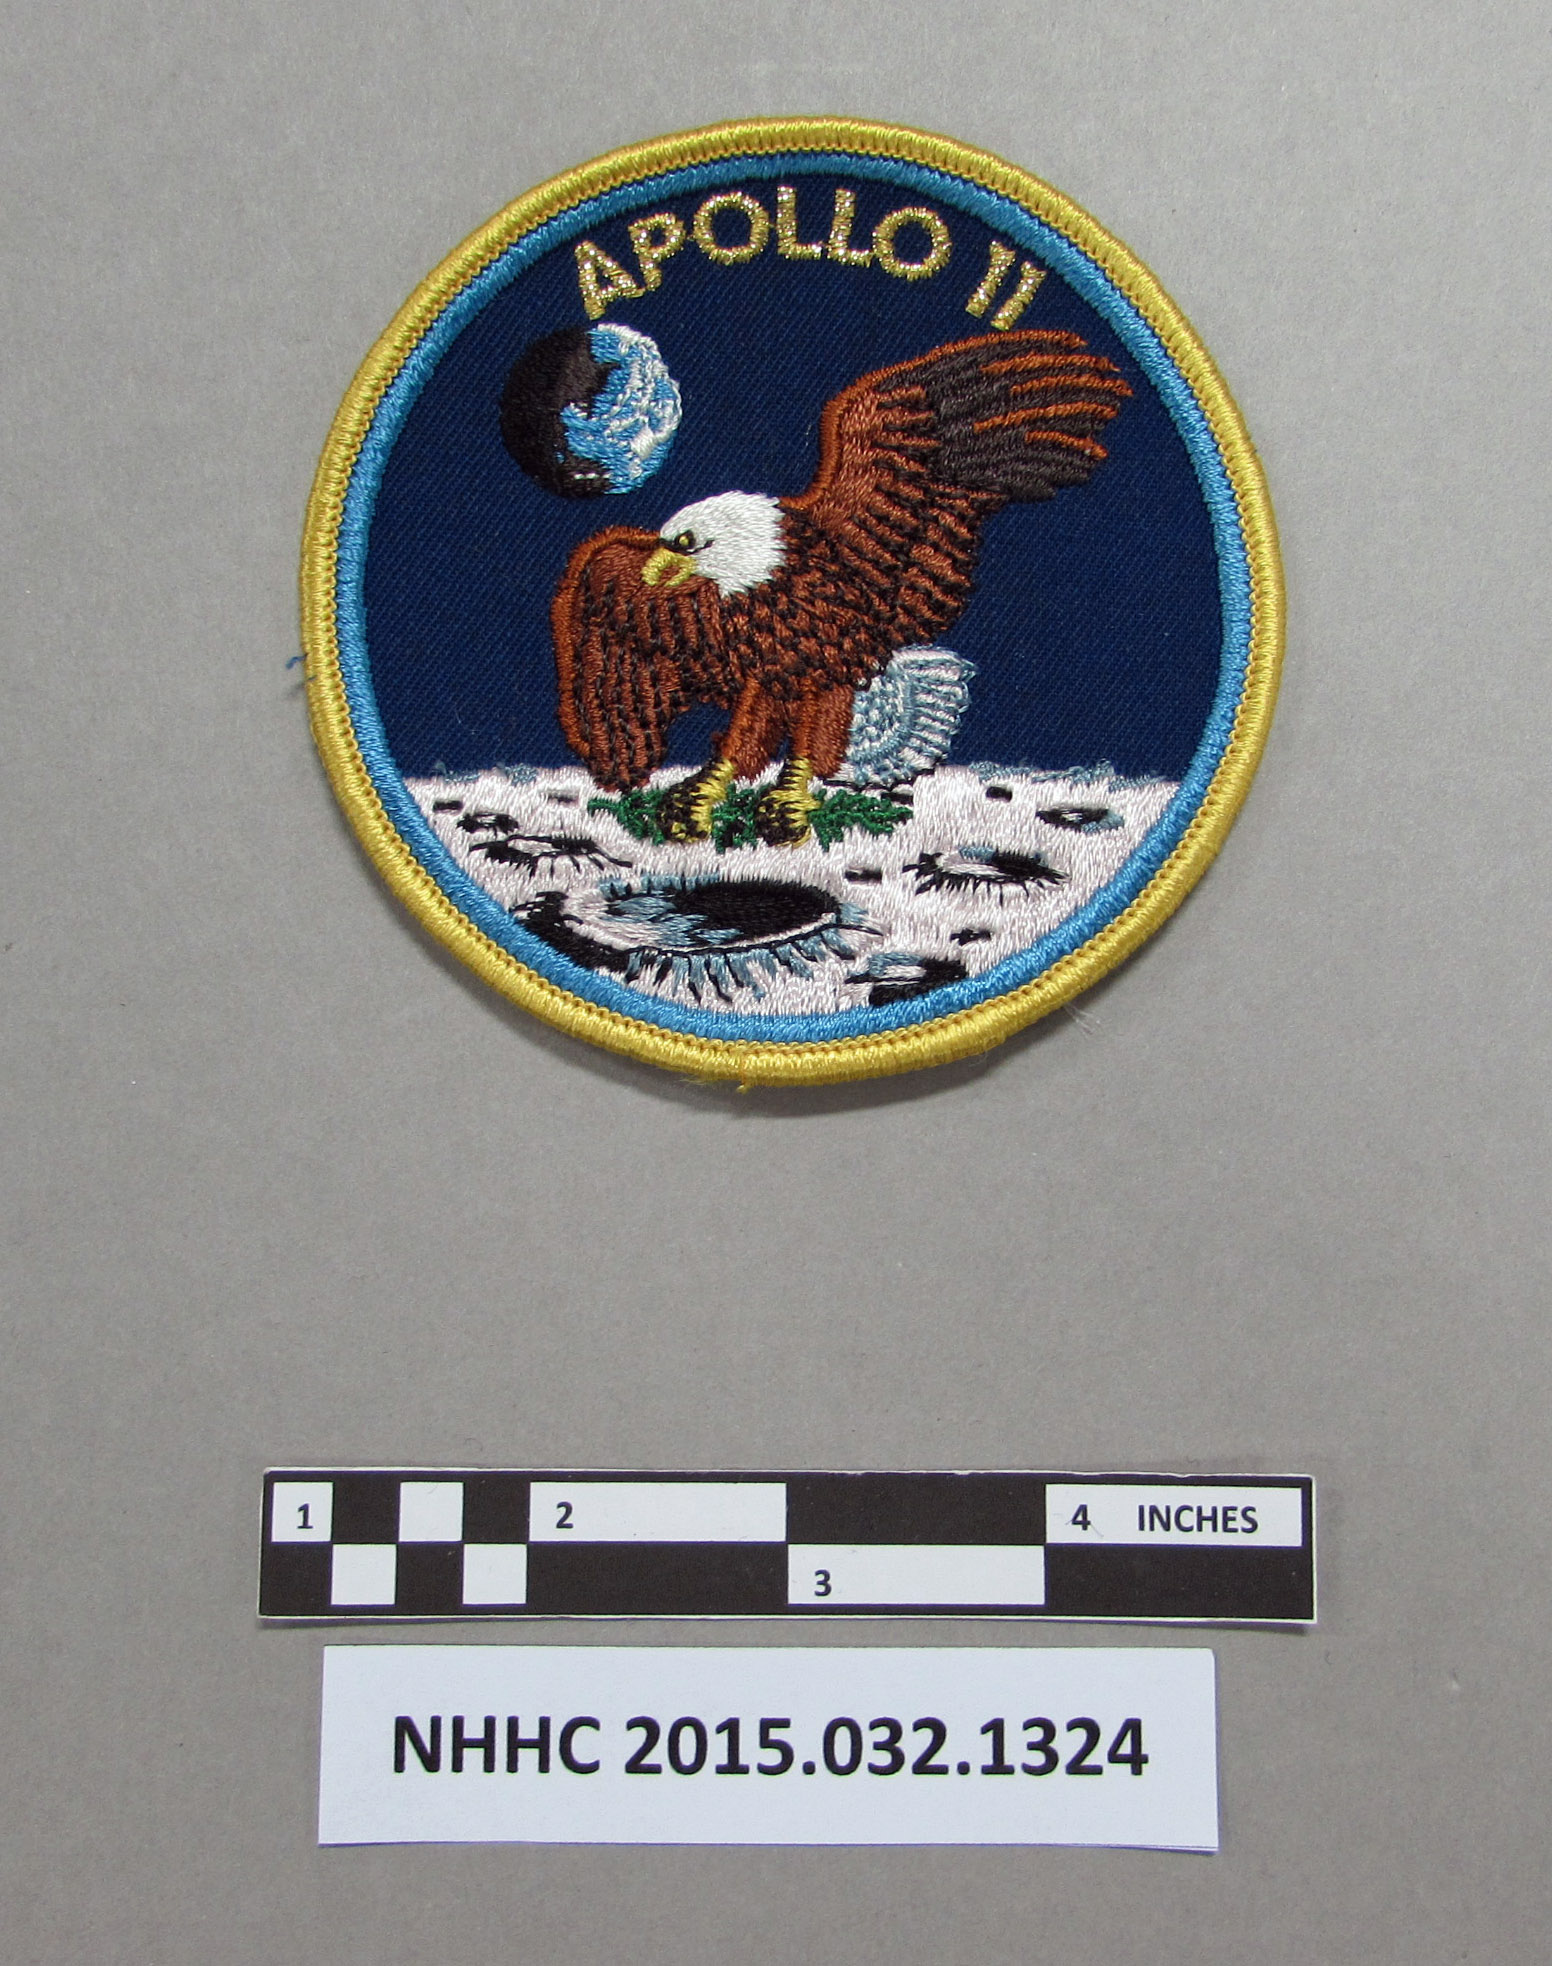 uniforms astronaut patches with eagle